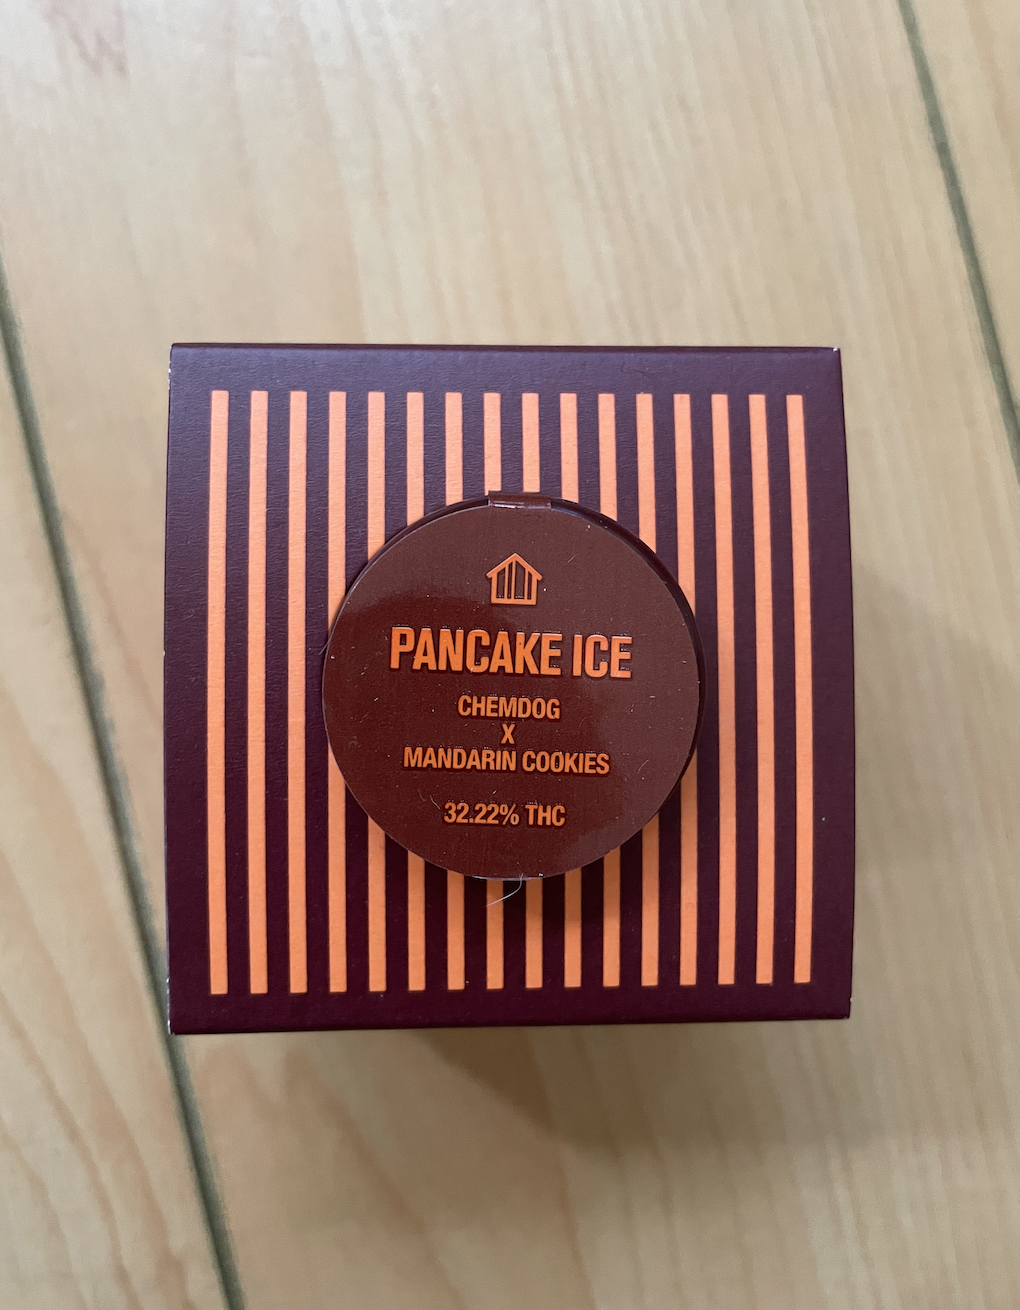 An image of the packaging for Pancake Ice